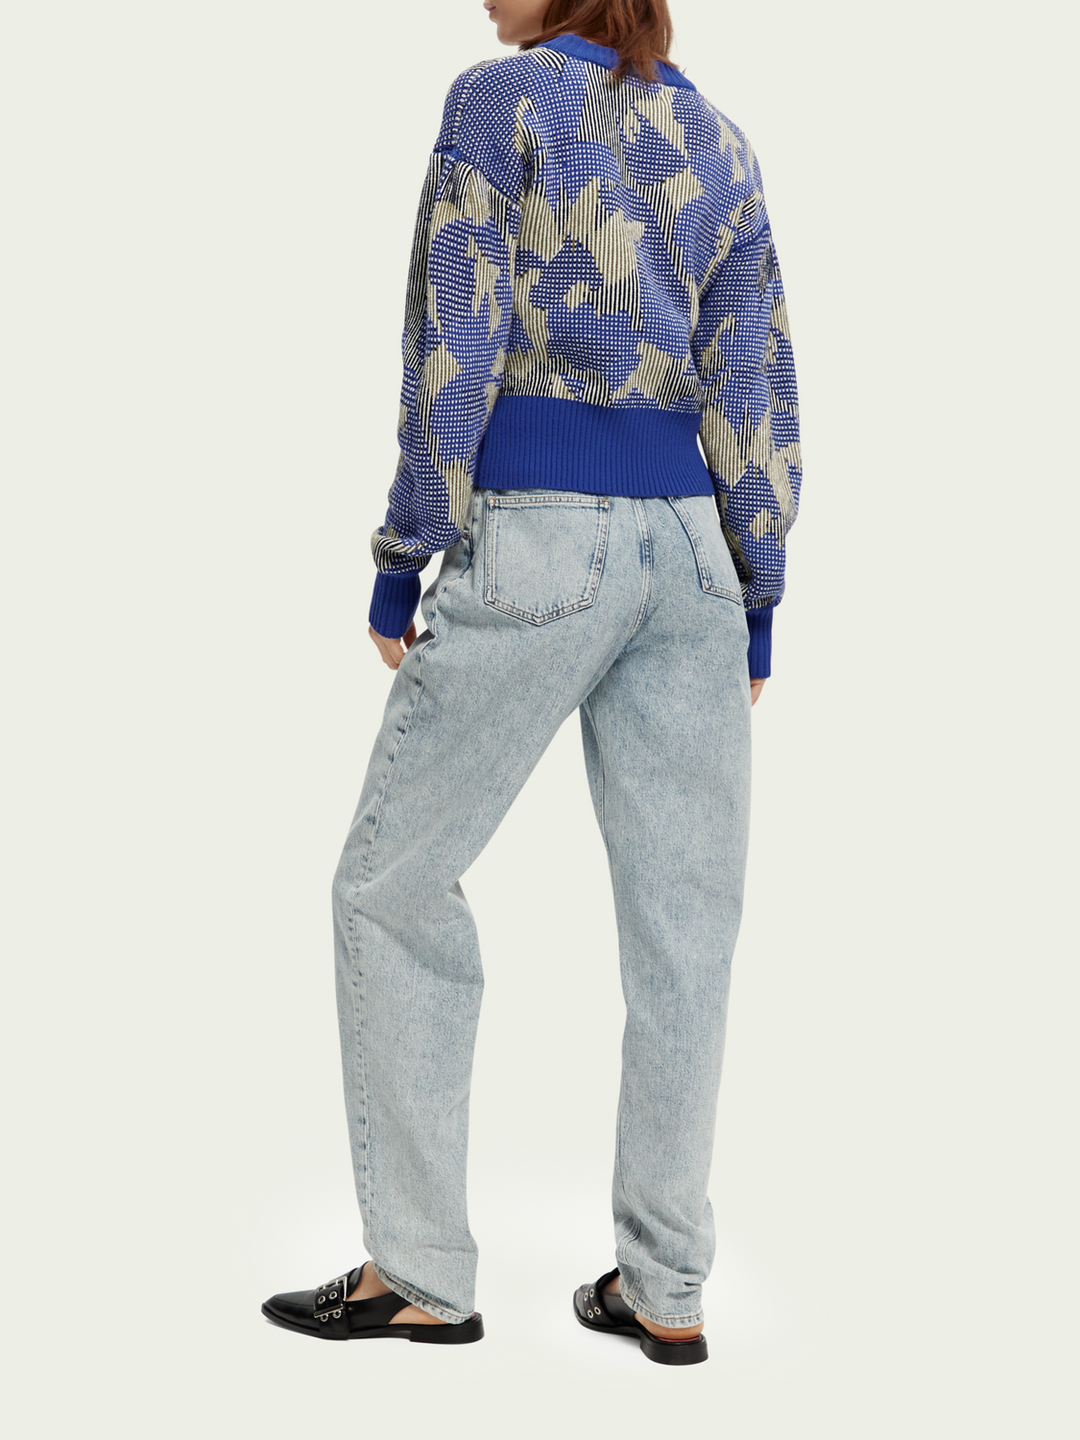 Abstract Jacquard Pullover